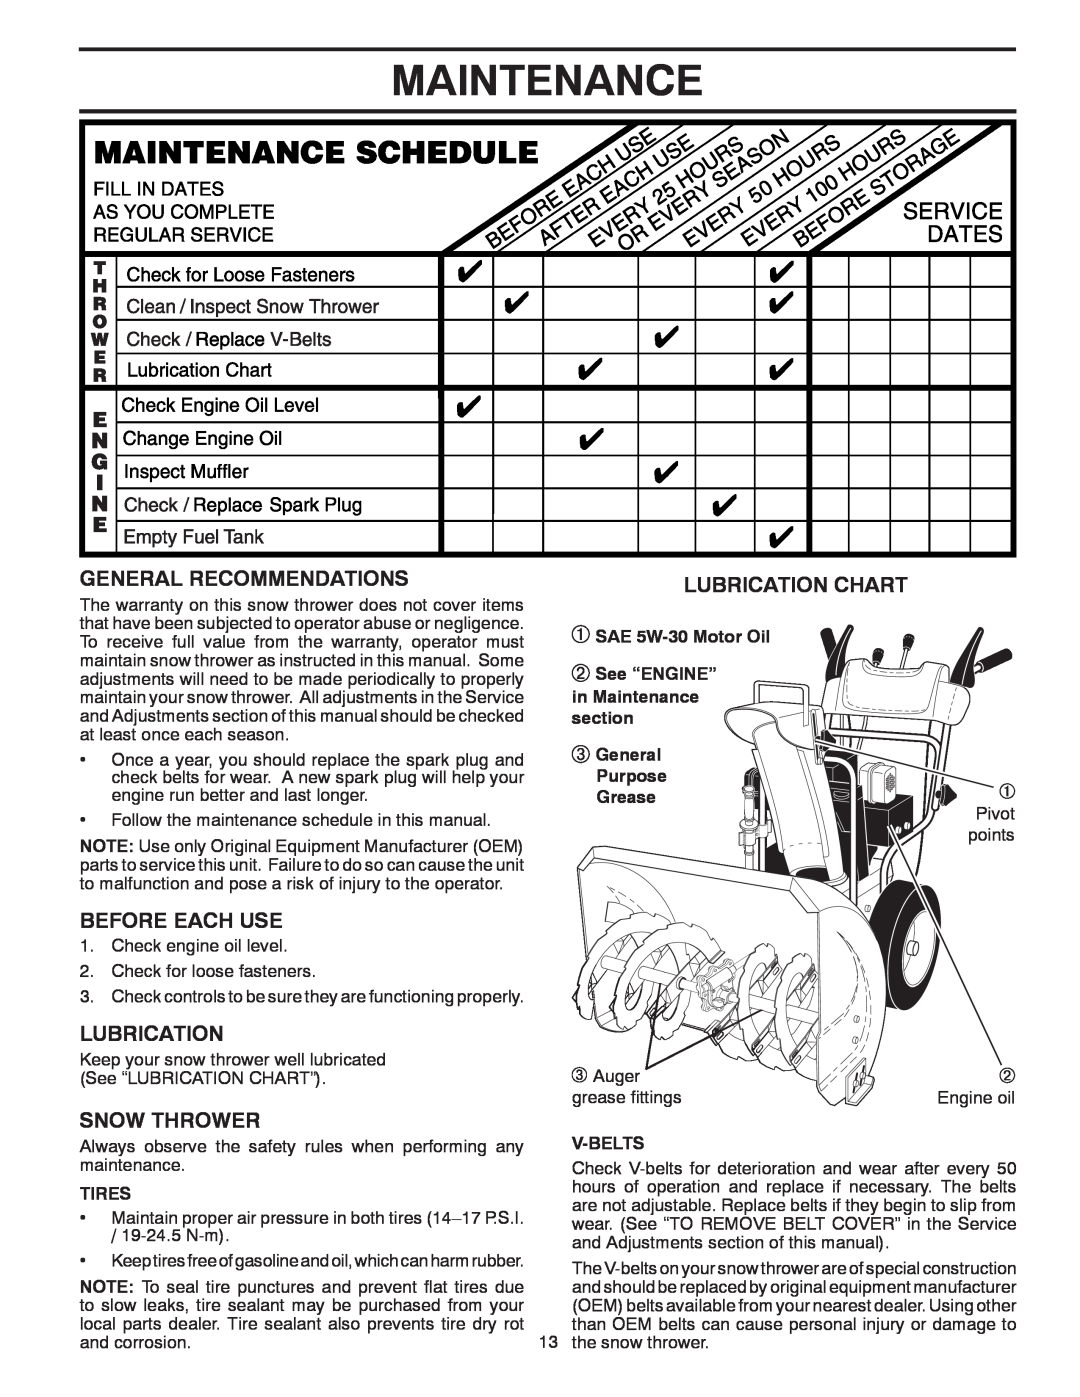 Poulan 96198002000 Maintenance, General Recommendations, Before Each Use, Snow Thrower, Lubrication Chart, Tires 